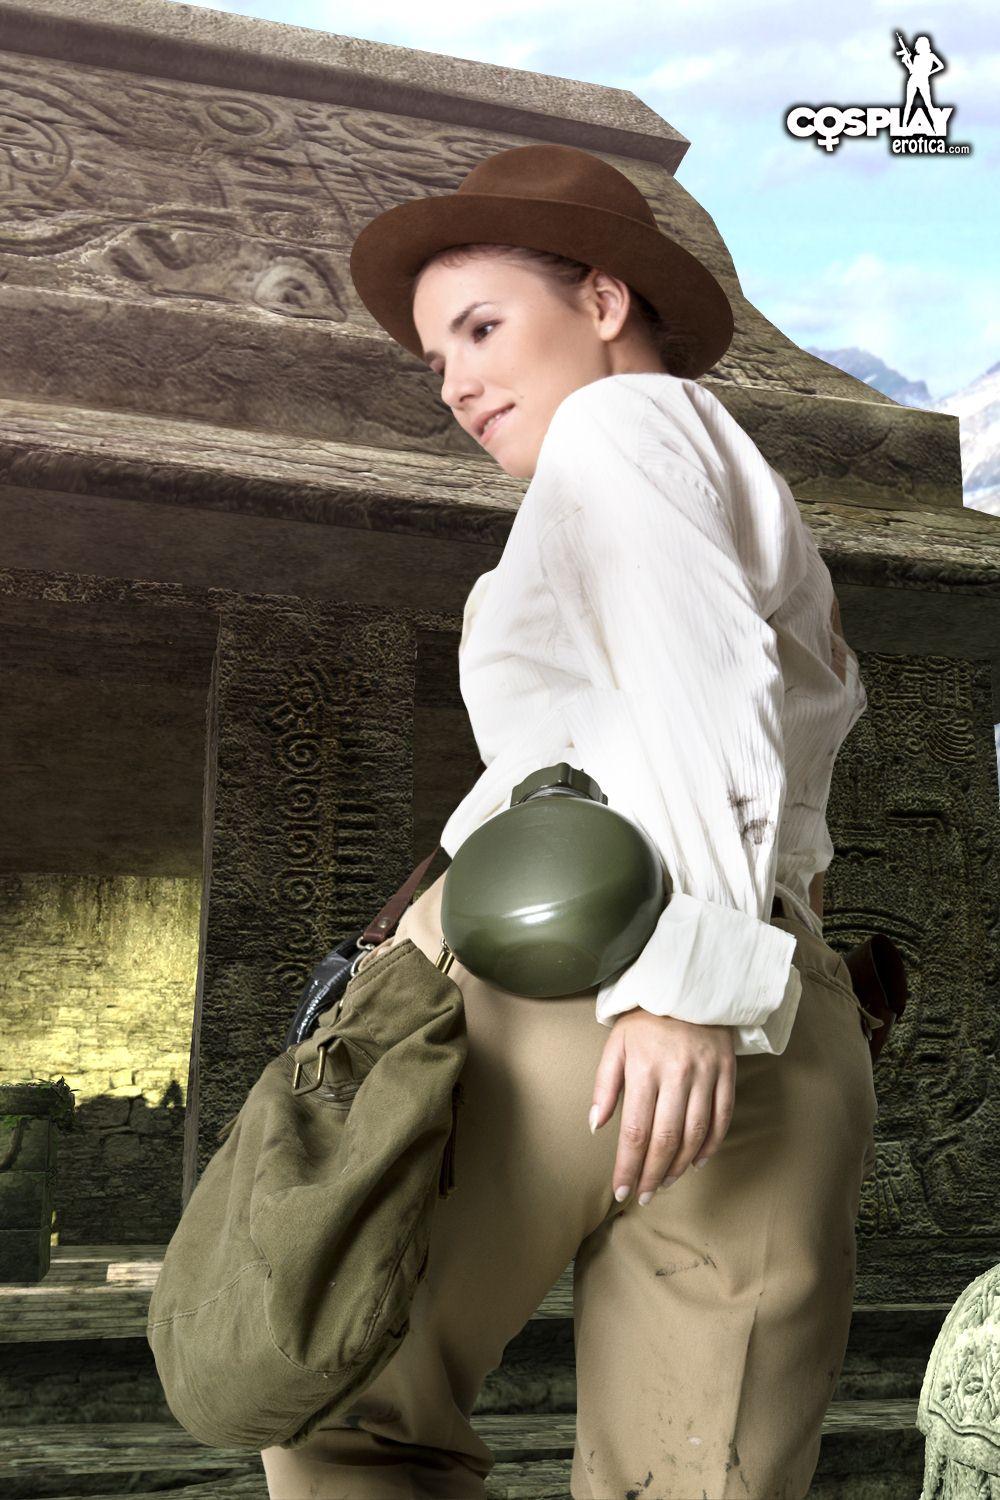 Cosplayer Cassie dresses up as a sexy female Indiana Jones #53702657